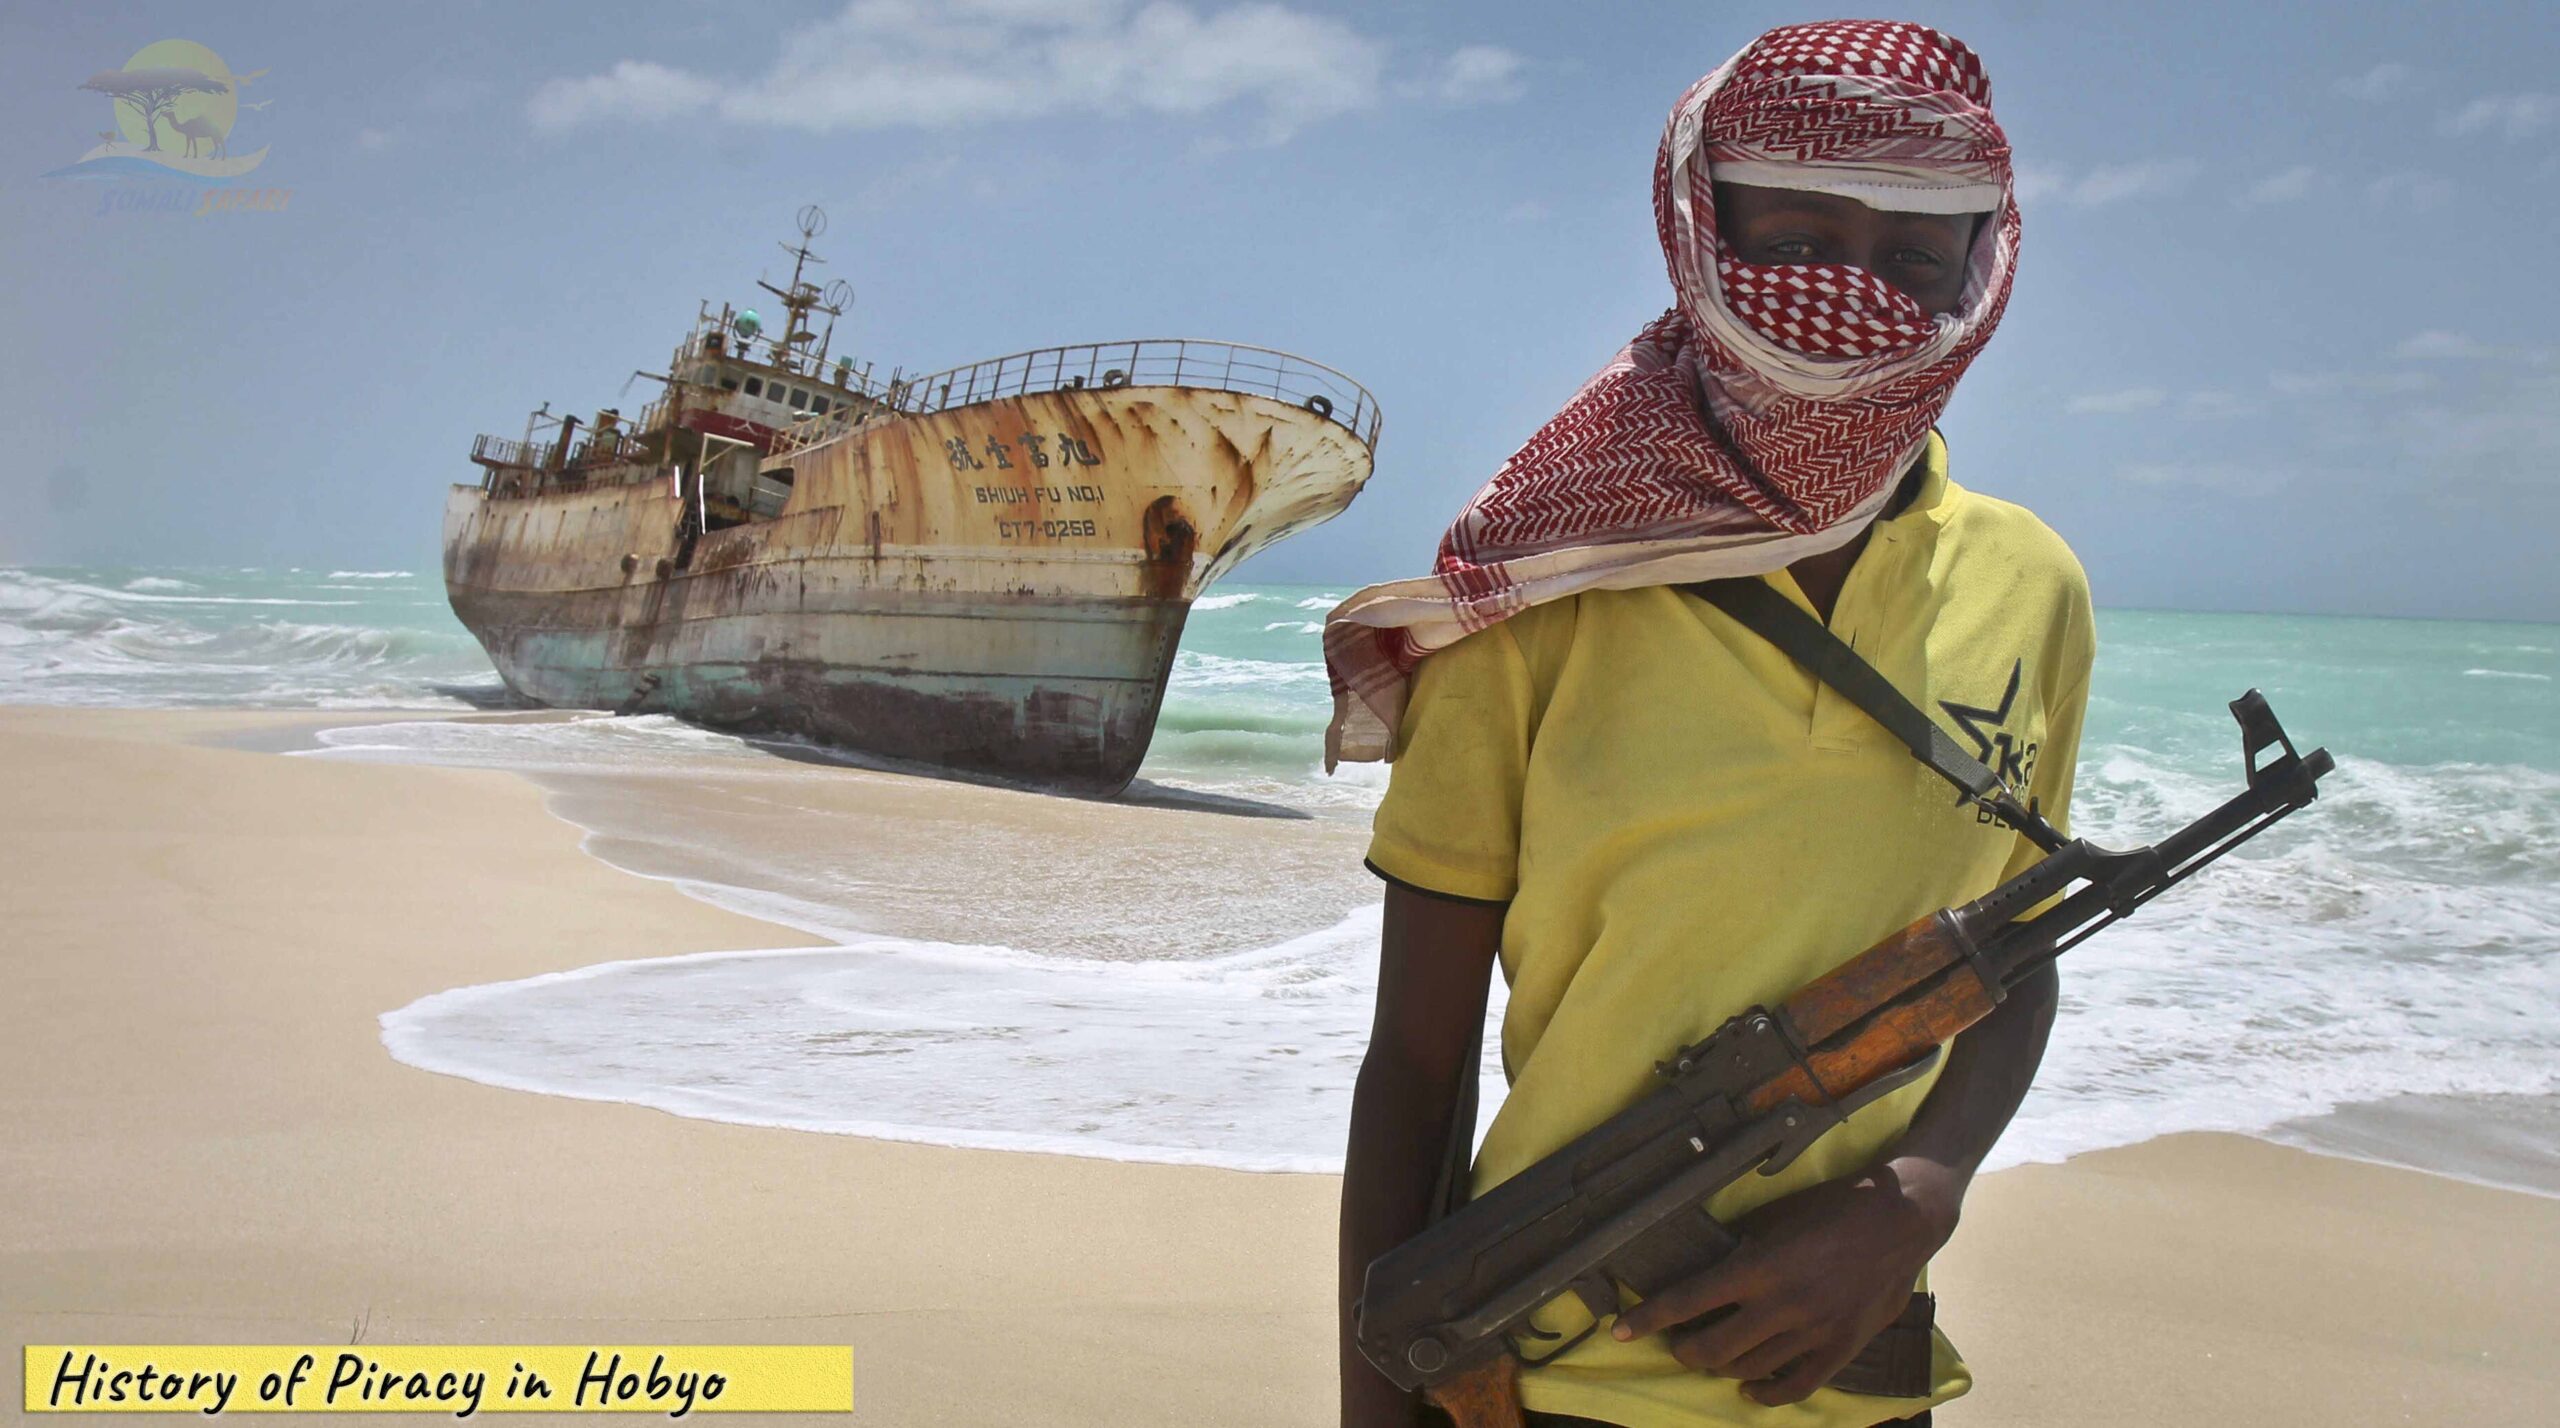 Hobyo Beach Town “Once Home of Piracy”